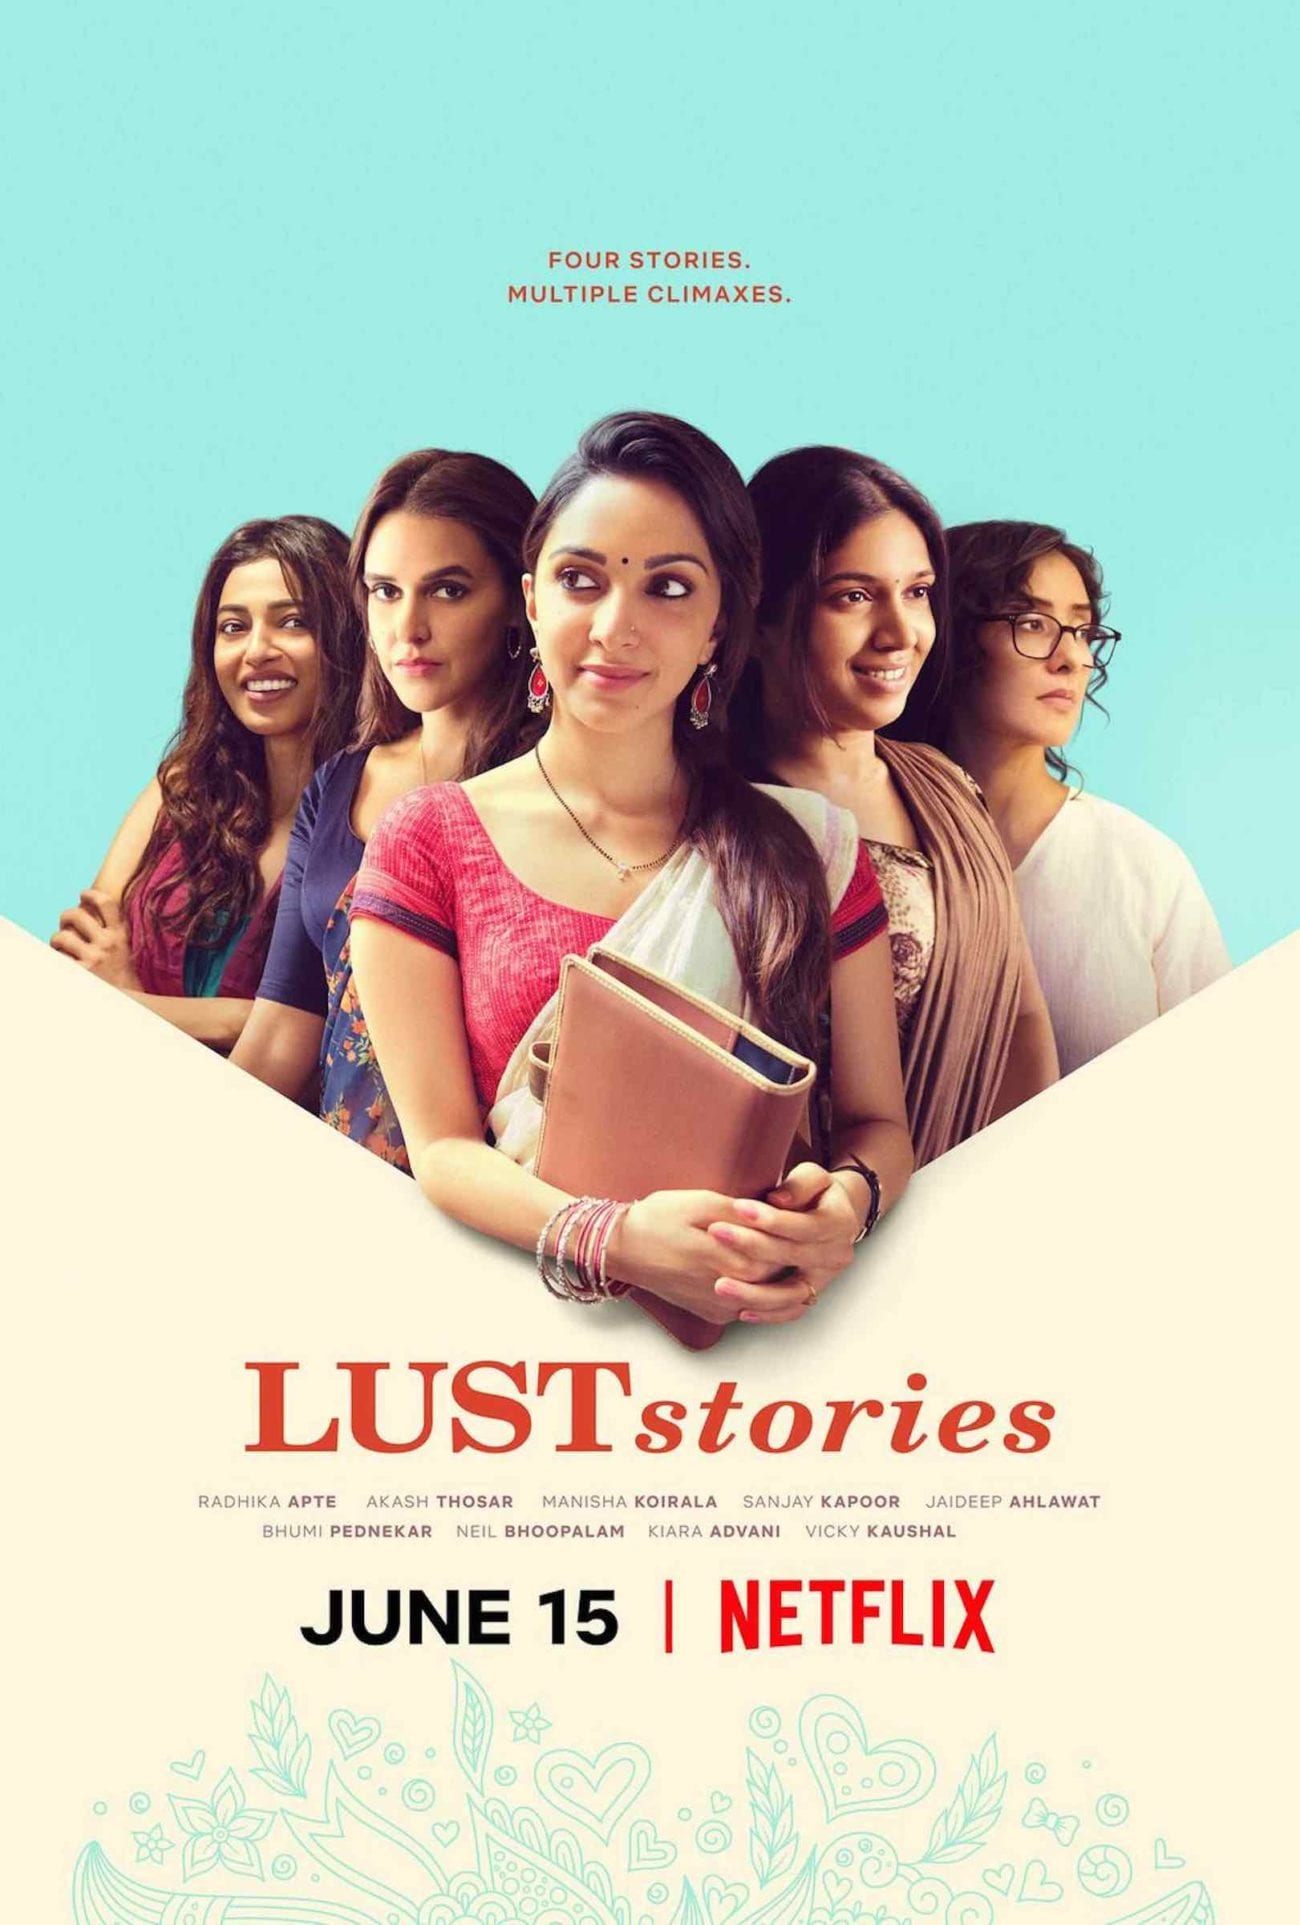 The Film Daily beginners guide to Netflix's 'Lust Stories'